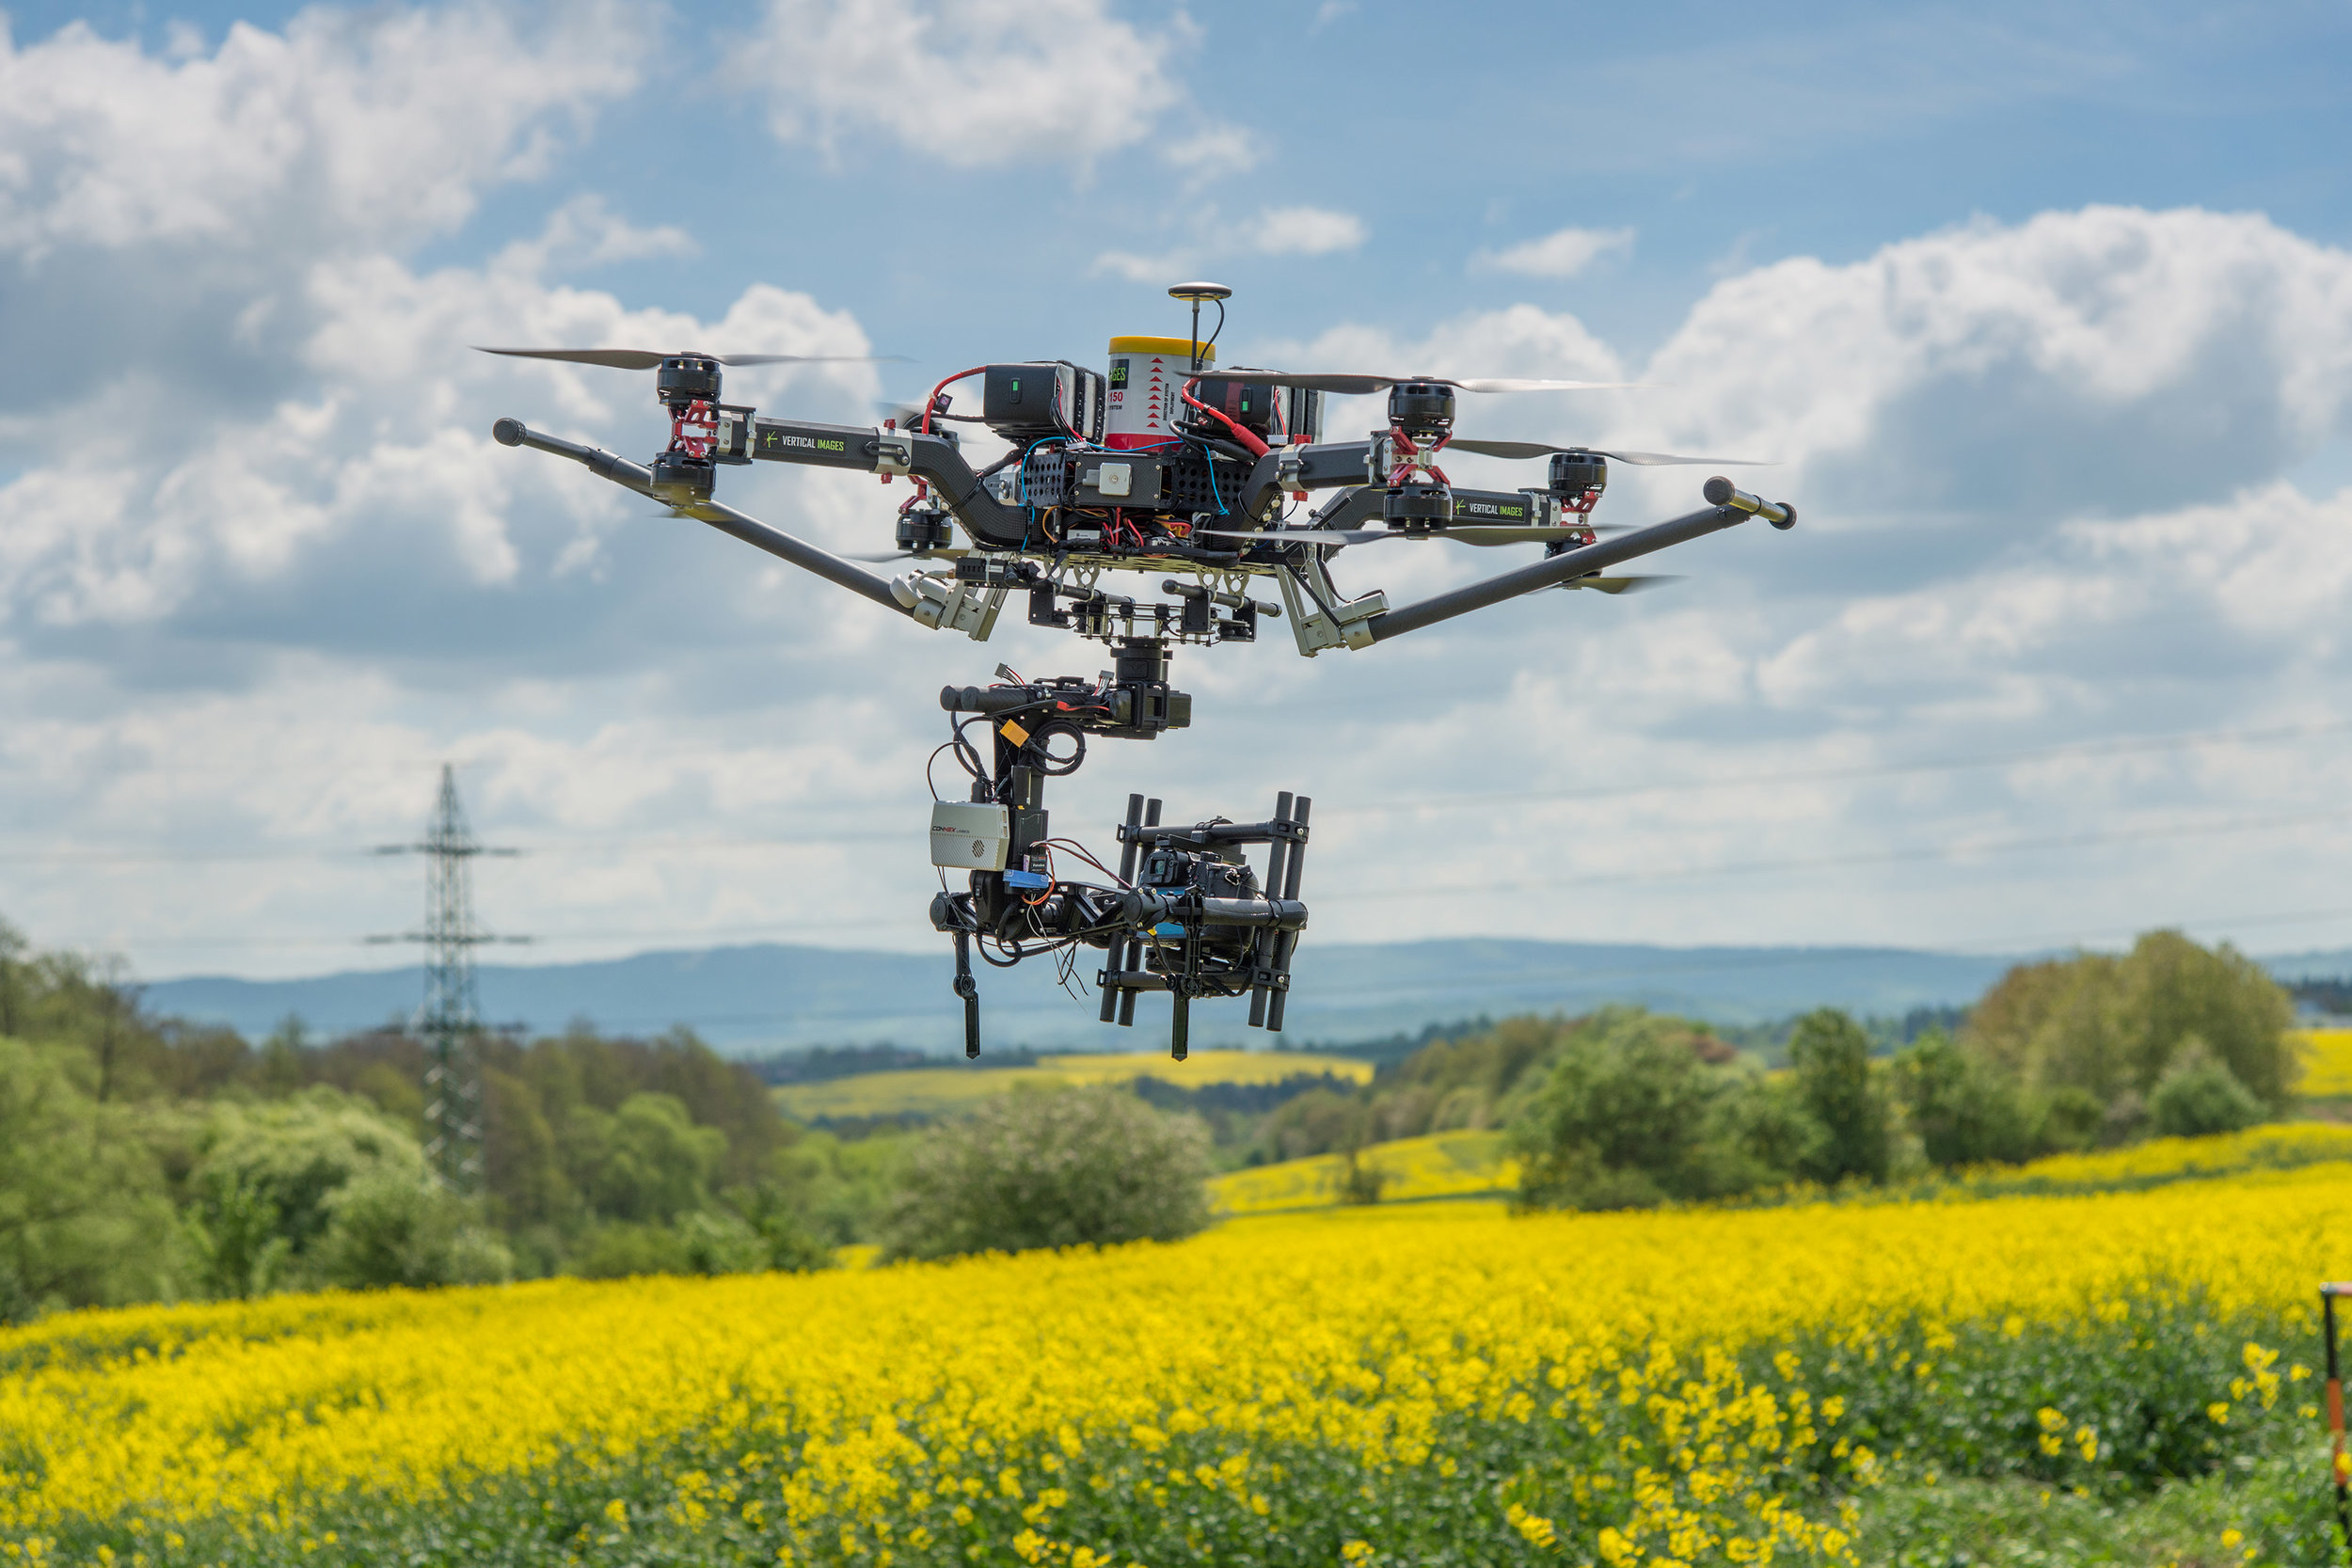 Aricultural drone mapping fields with hyperspectral camera